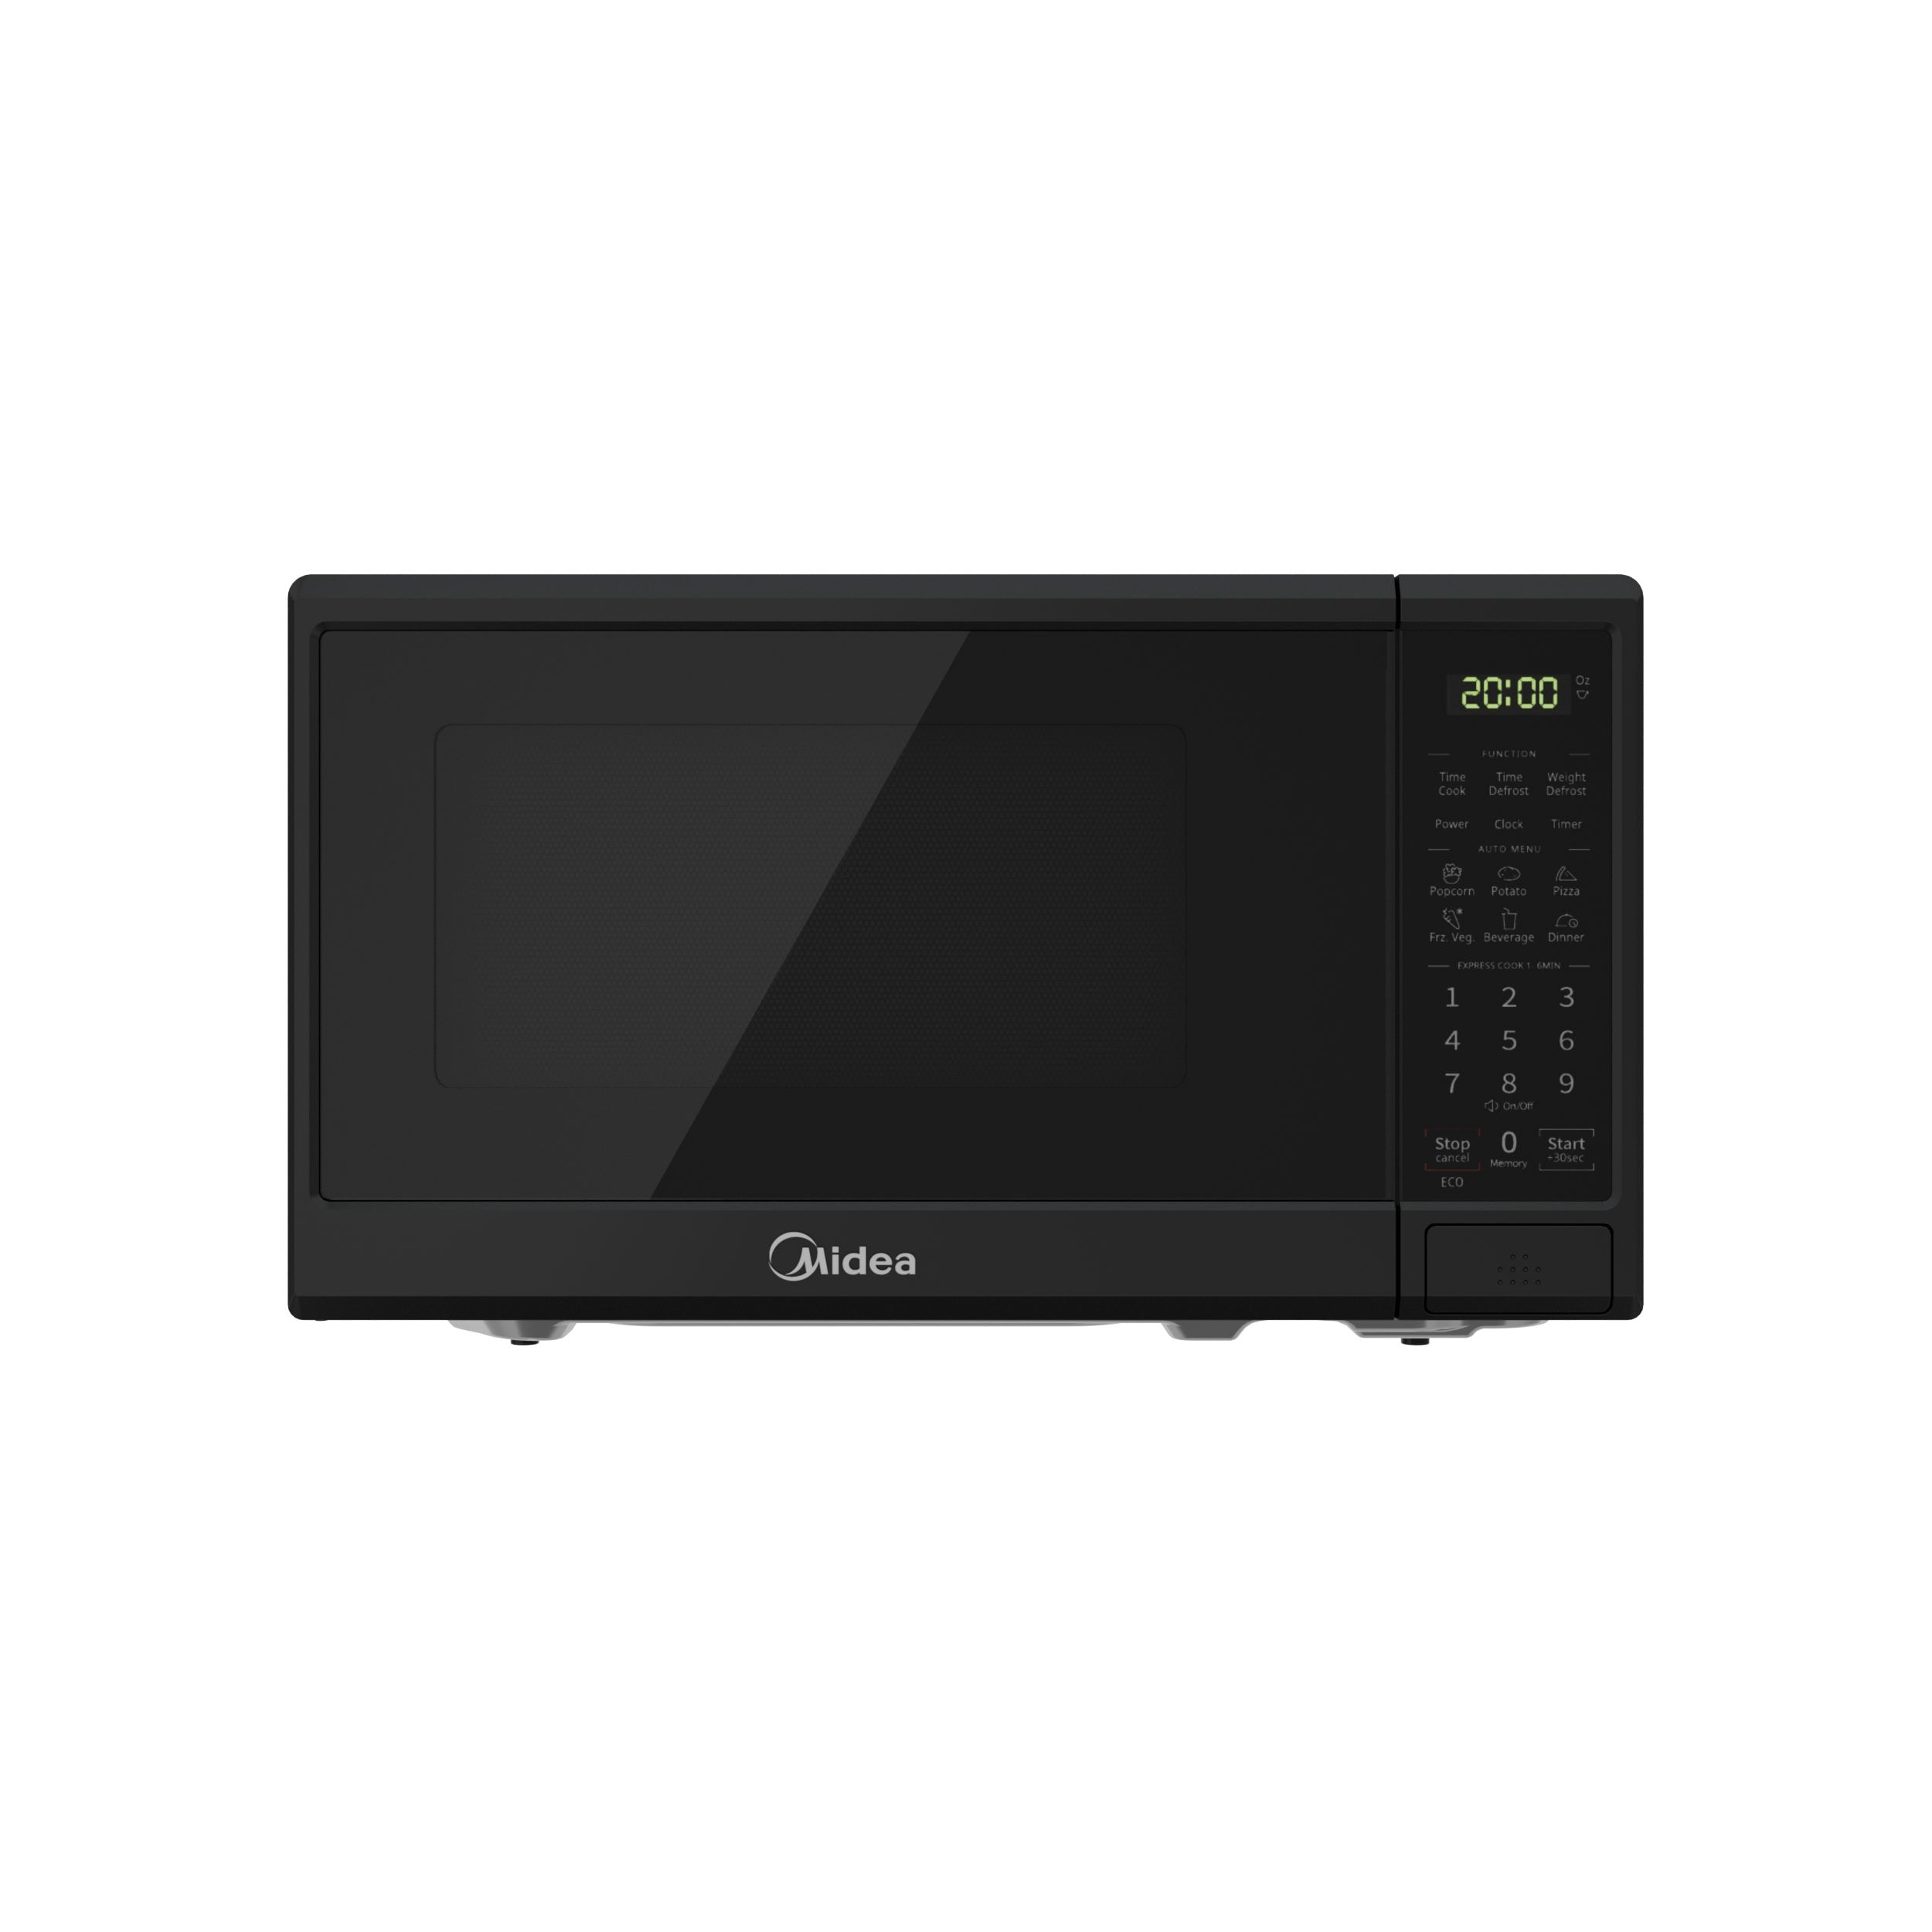 Cuisinart 0.7 cu. ft. 700-Watt Countertop microwave in Black and Stainless  Steel CMW-70 - The Home Depot